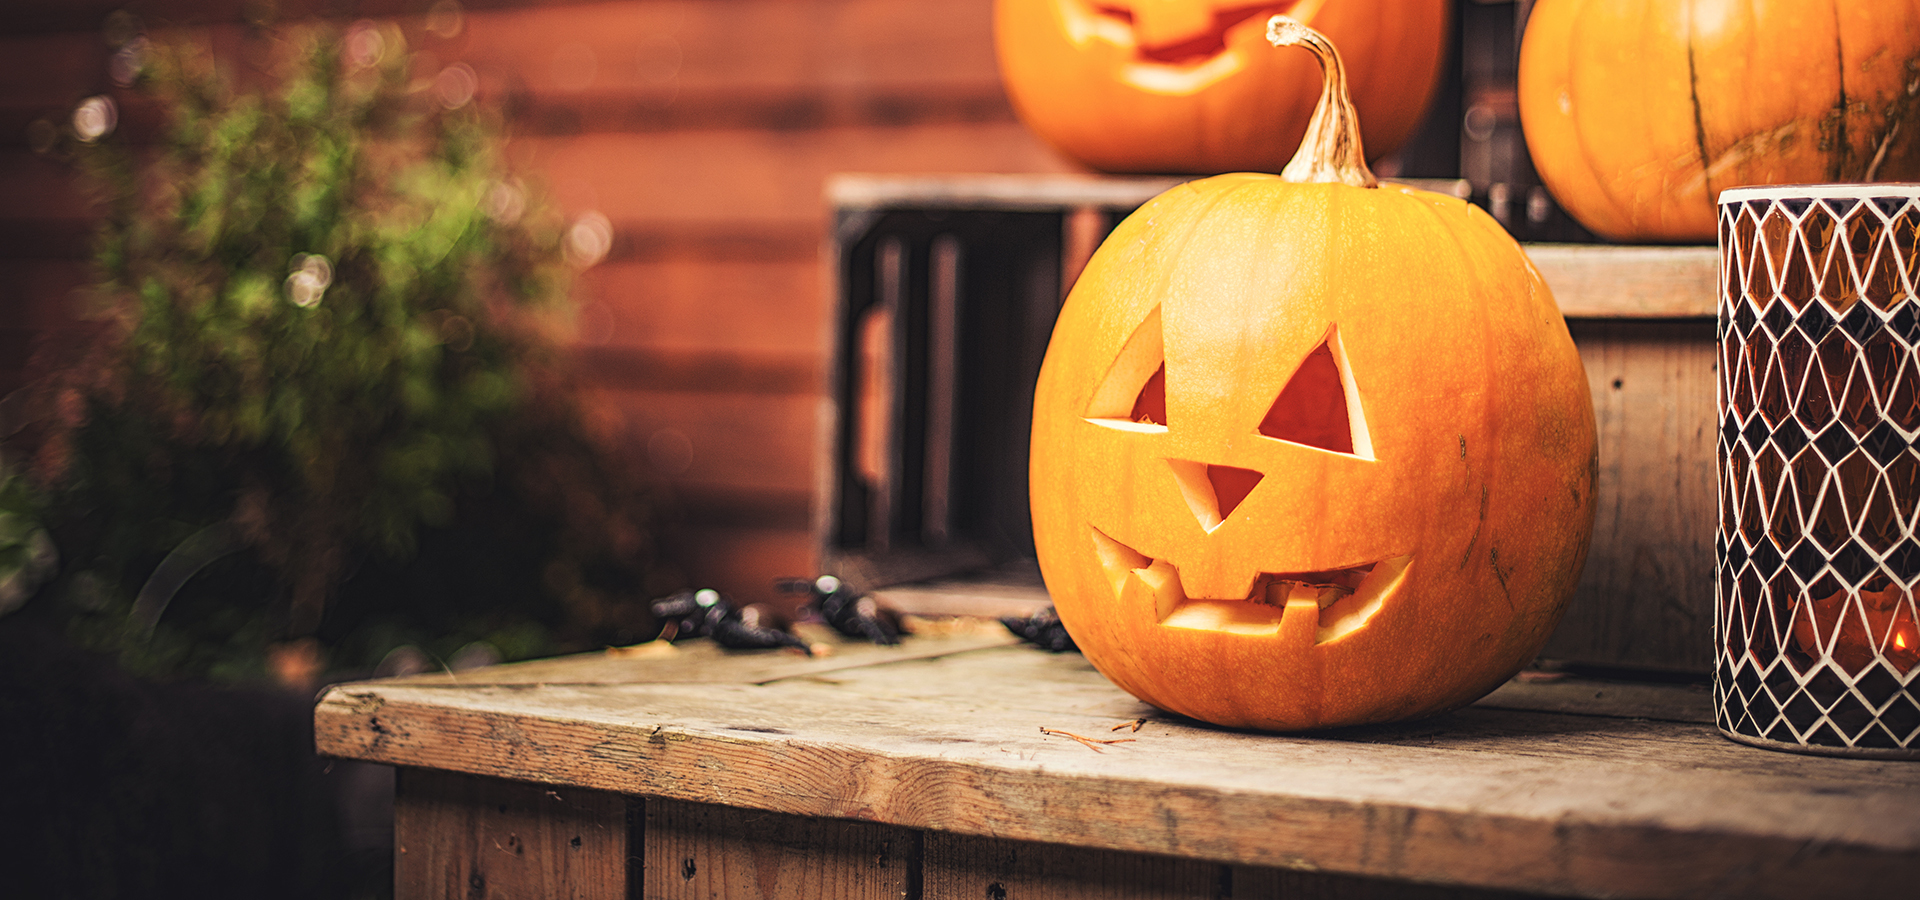 How to Decorate Your Porch For Trick-Or-Treaters - Cresleigh Homes